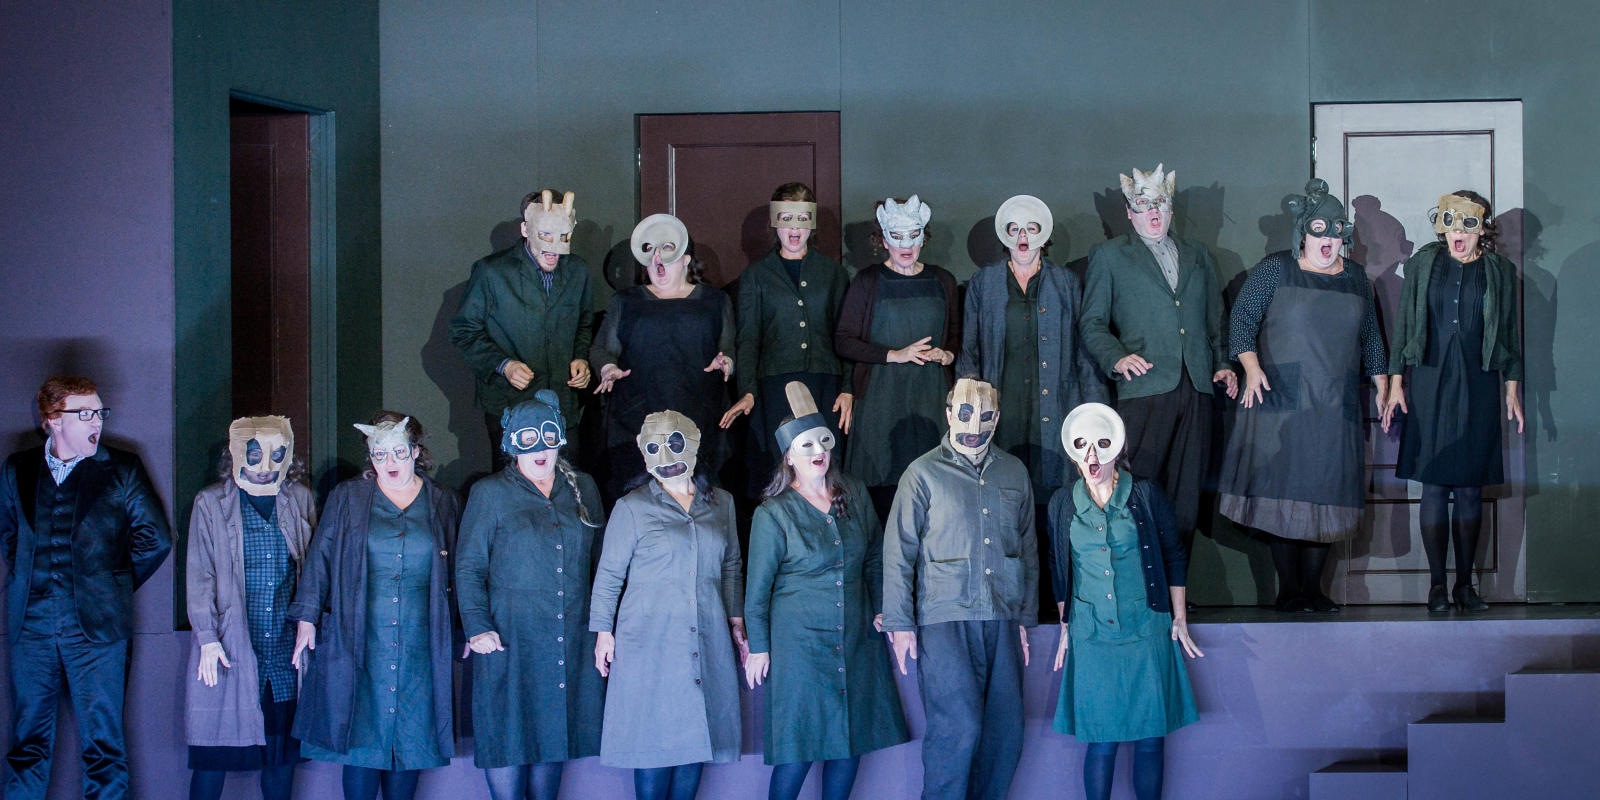 don giovanni chorus in scary masks on stage